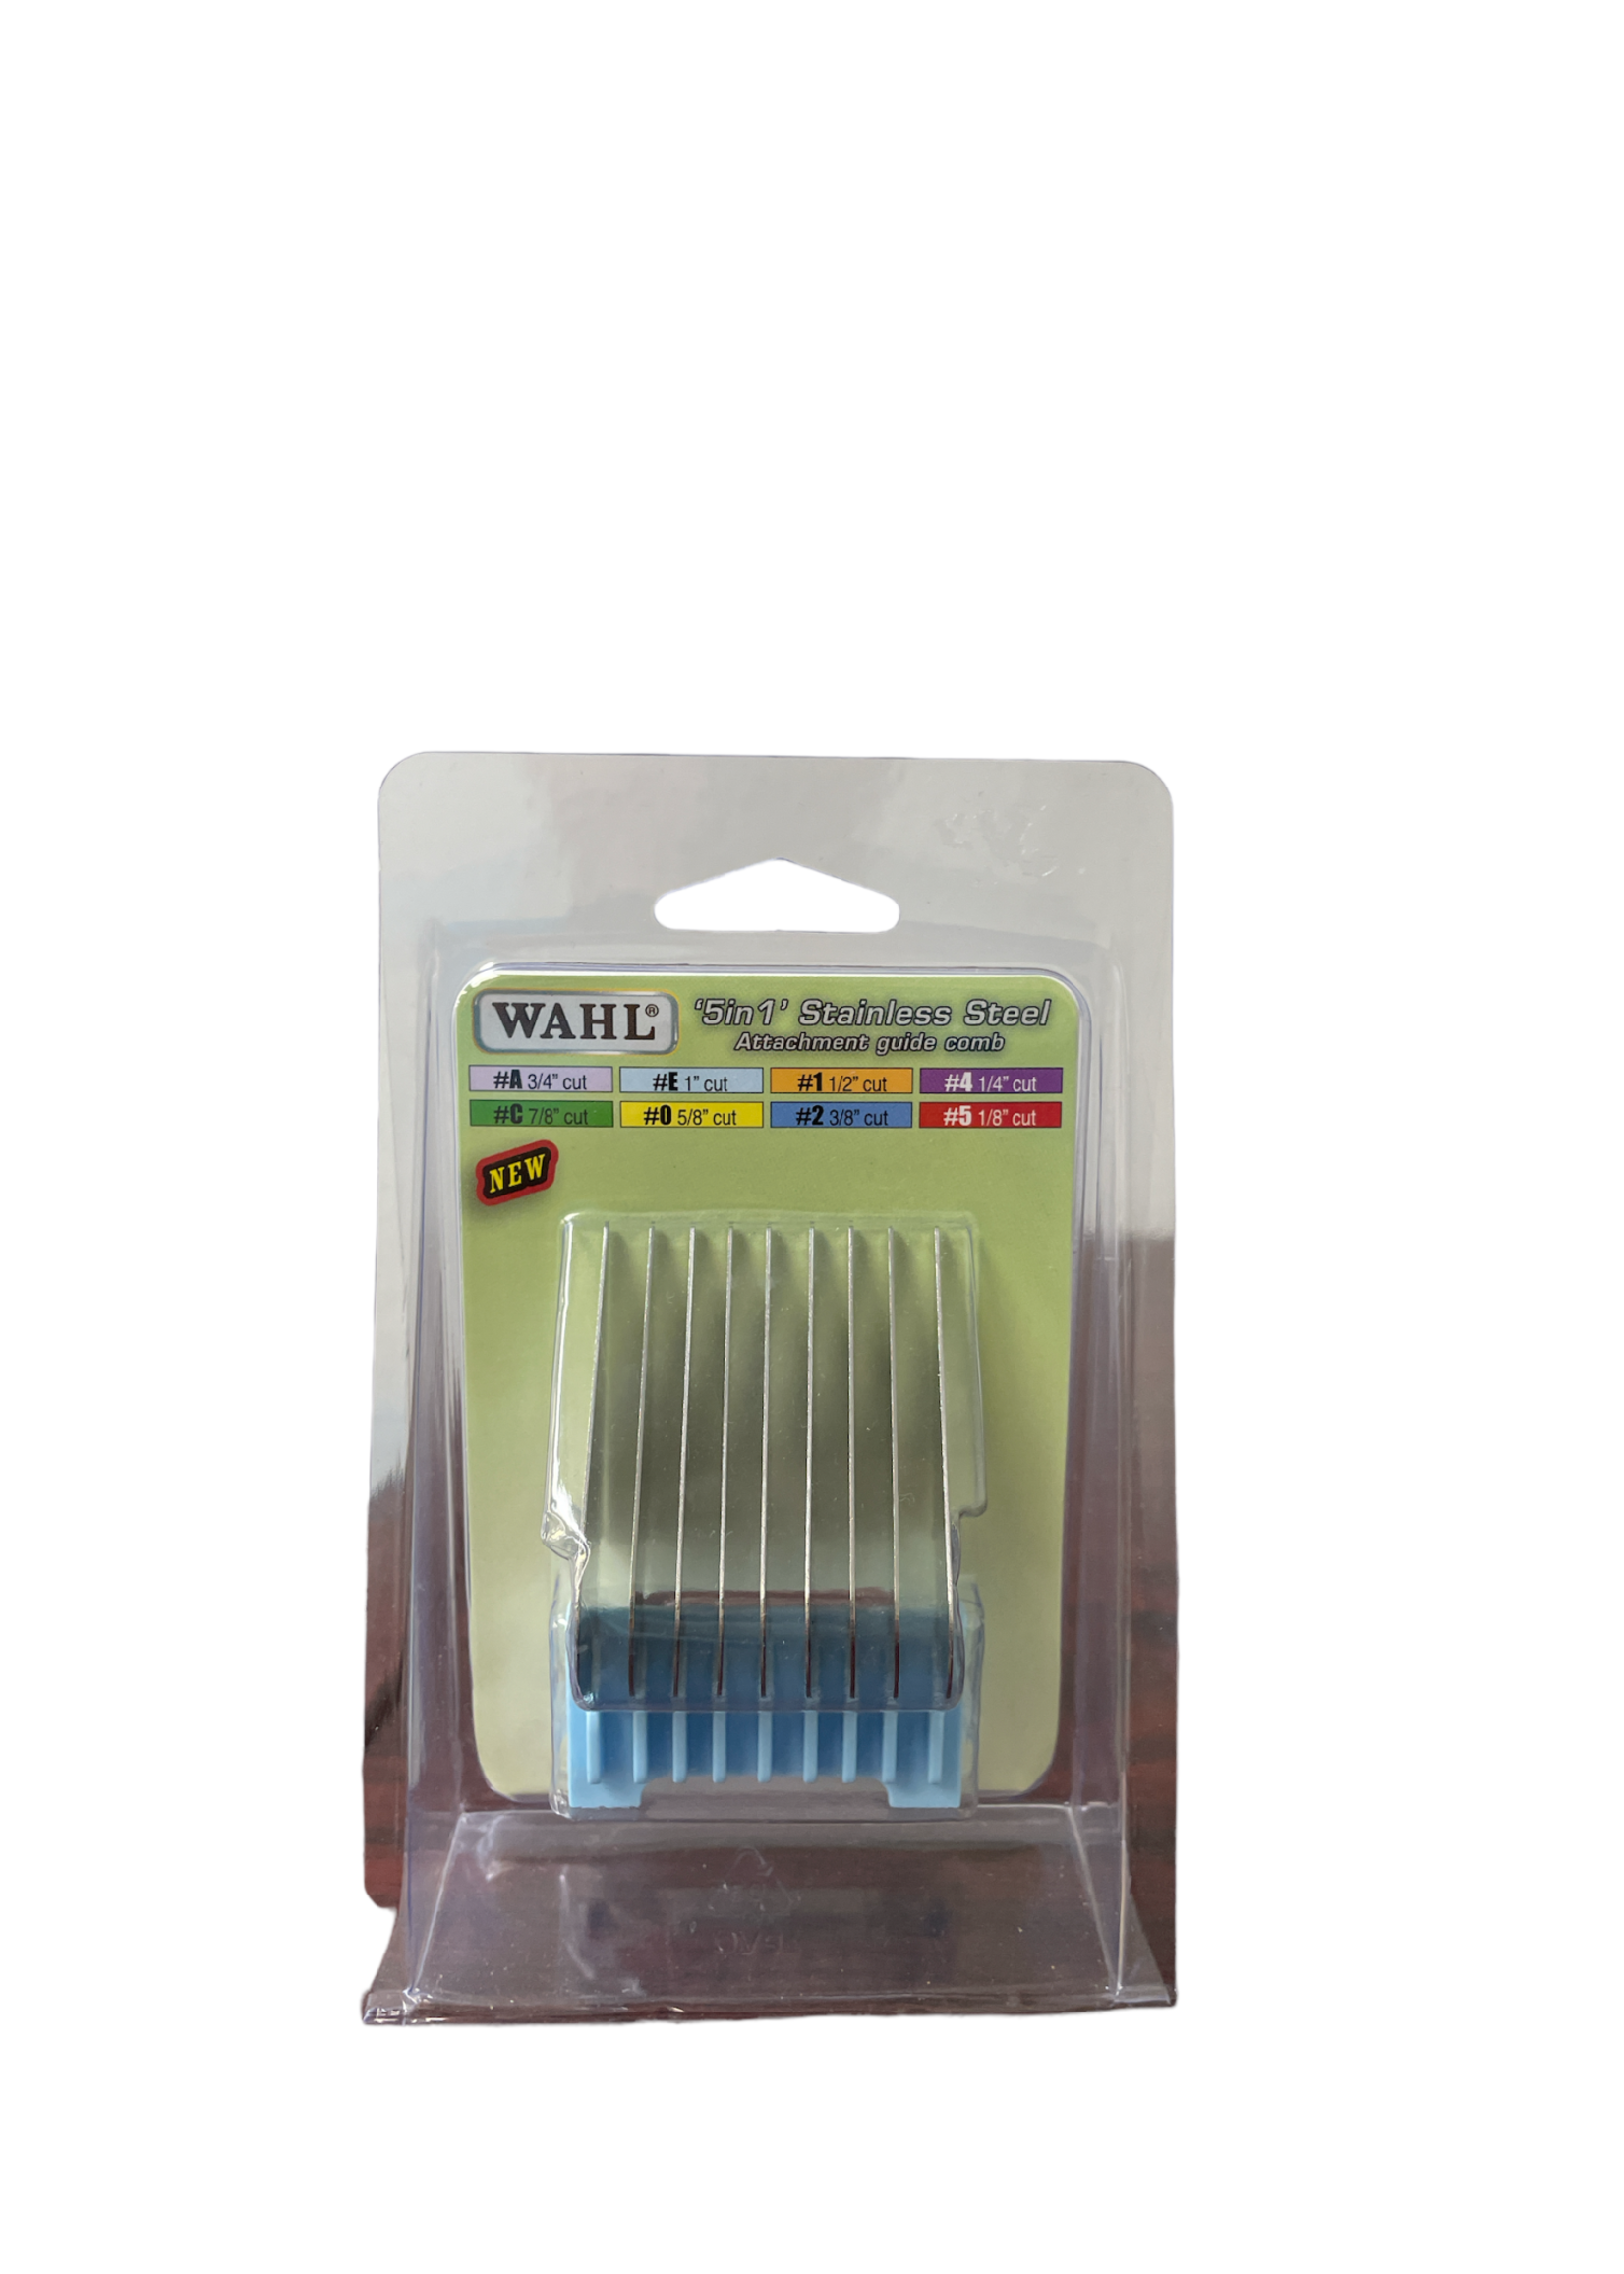 Wahl Wahl #E comb for 5" in 1" blade-light blue.